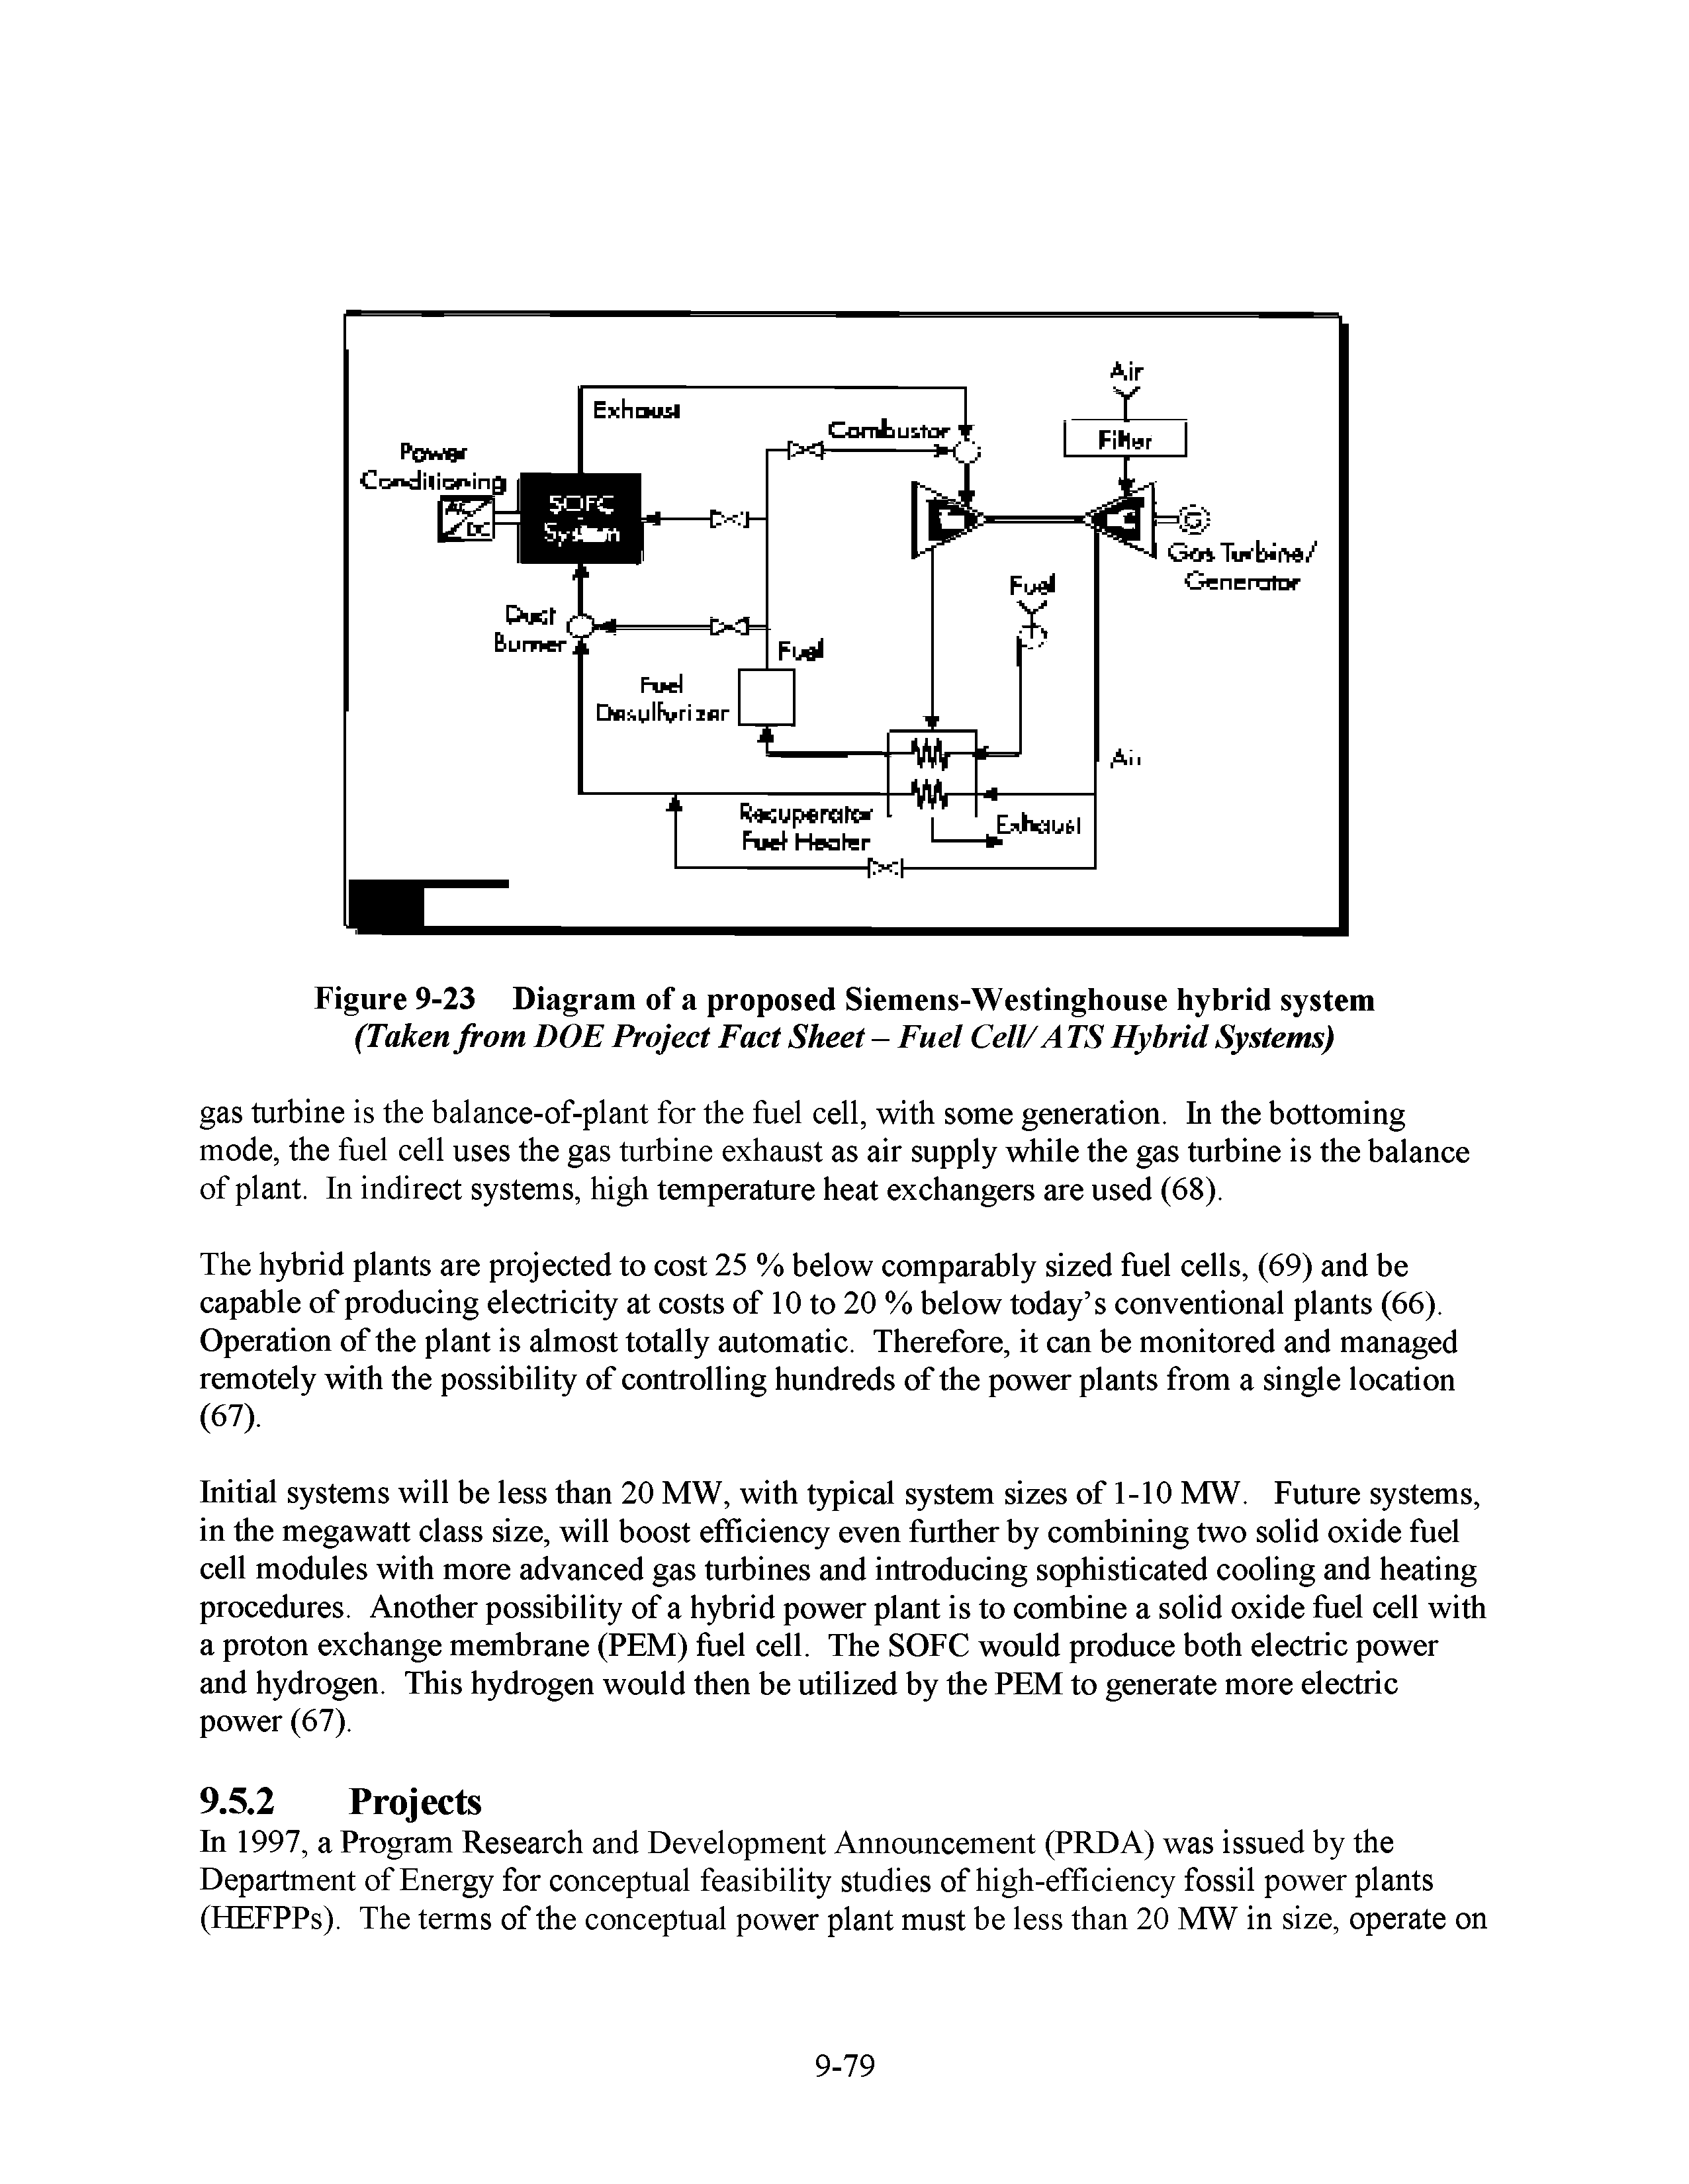 Figure 9-23 Diagram of a proposed Siemens-Westinghouse hybrid system (Taken from DOE Project Fact Sheet - Fuel Cell/ATS Hybrid Systems)...